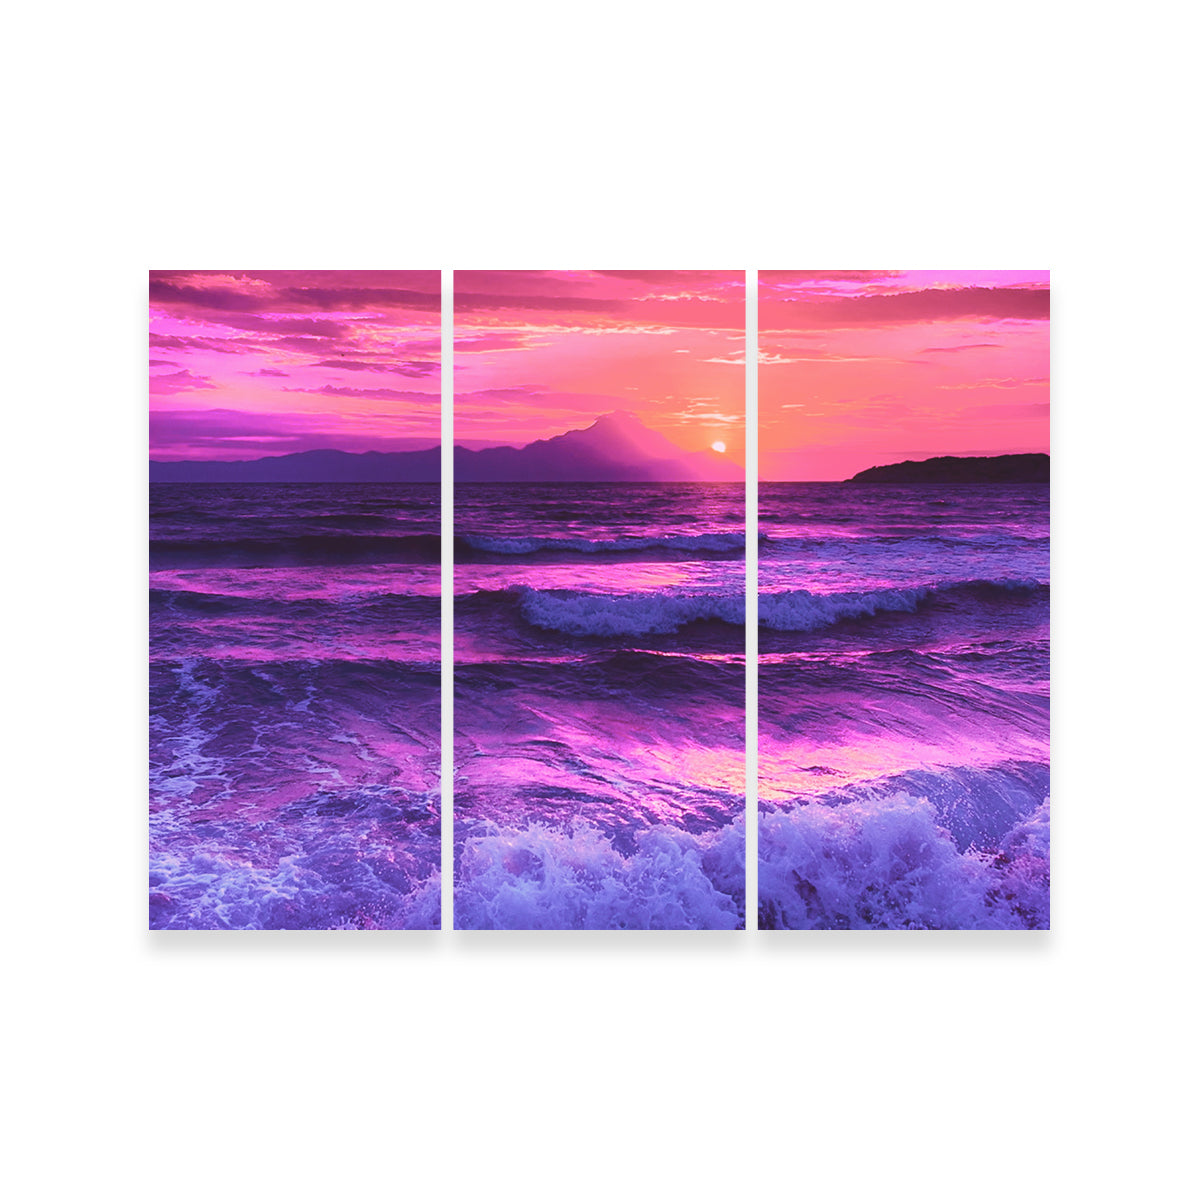 Oceanview at Sunset